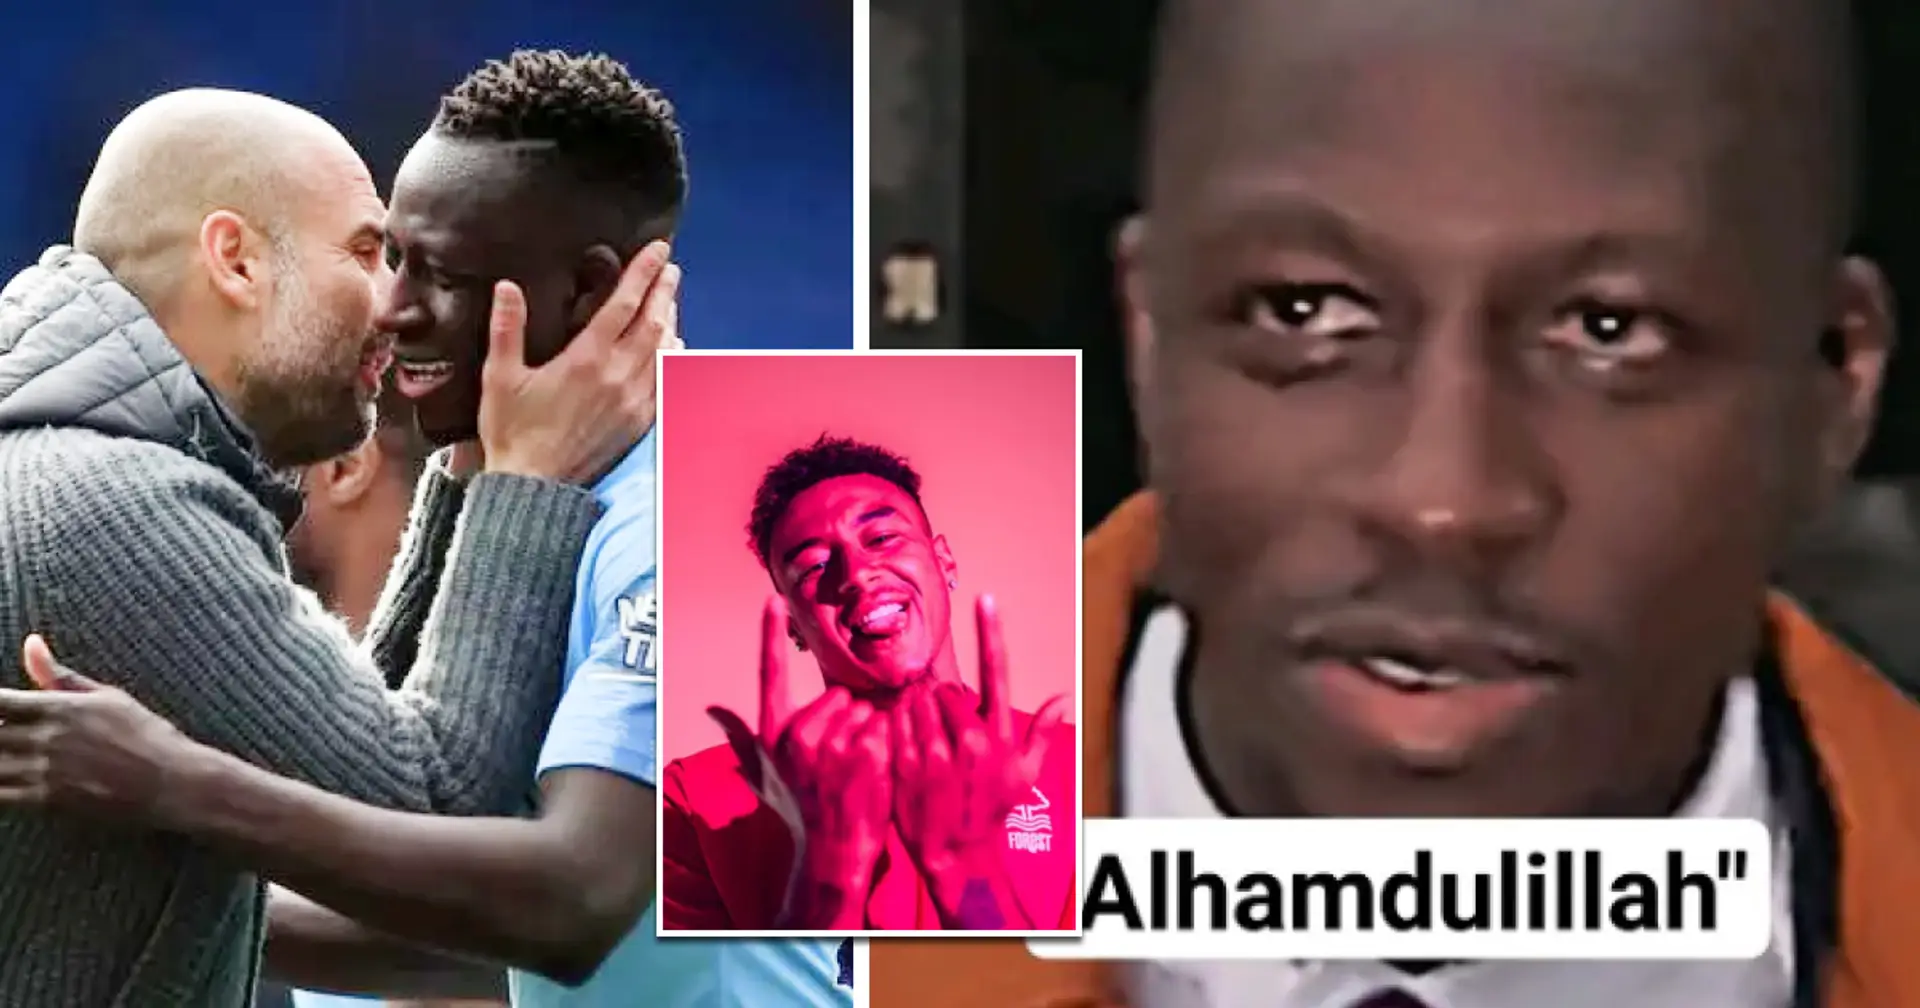 Revealed: 3 clubs were interested in Benjamin Mendy, 2 play in Premier League